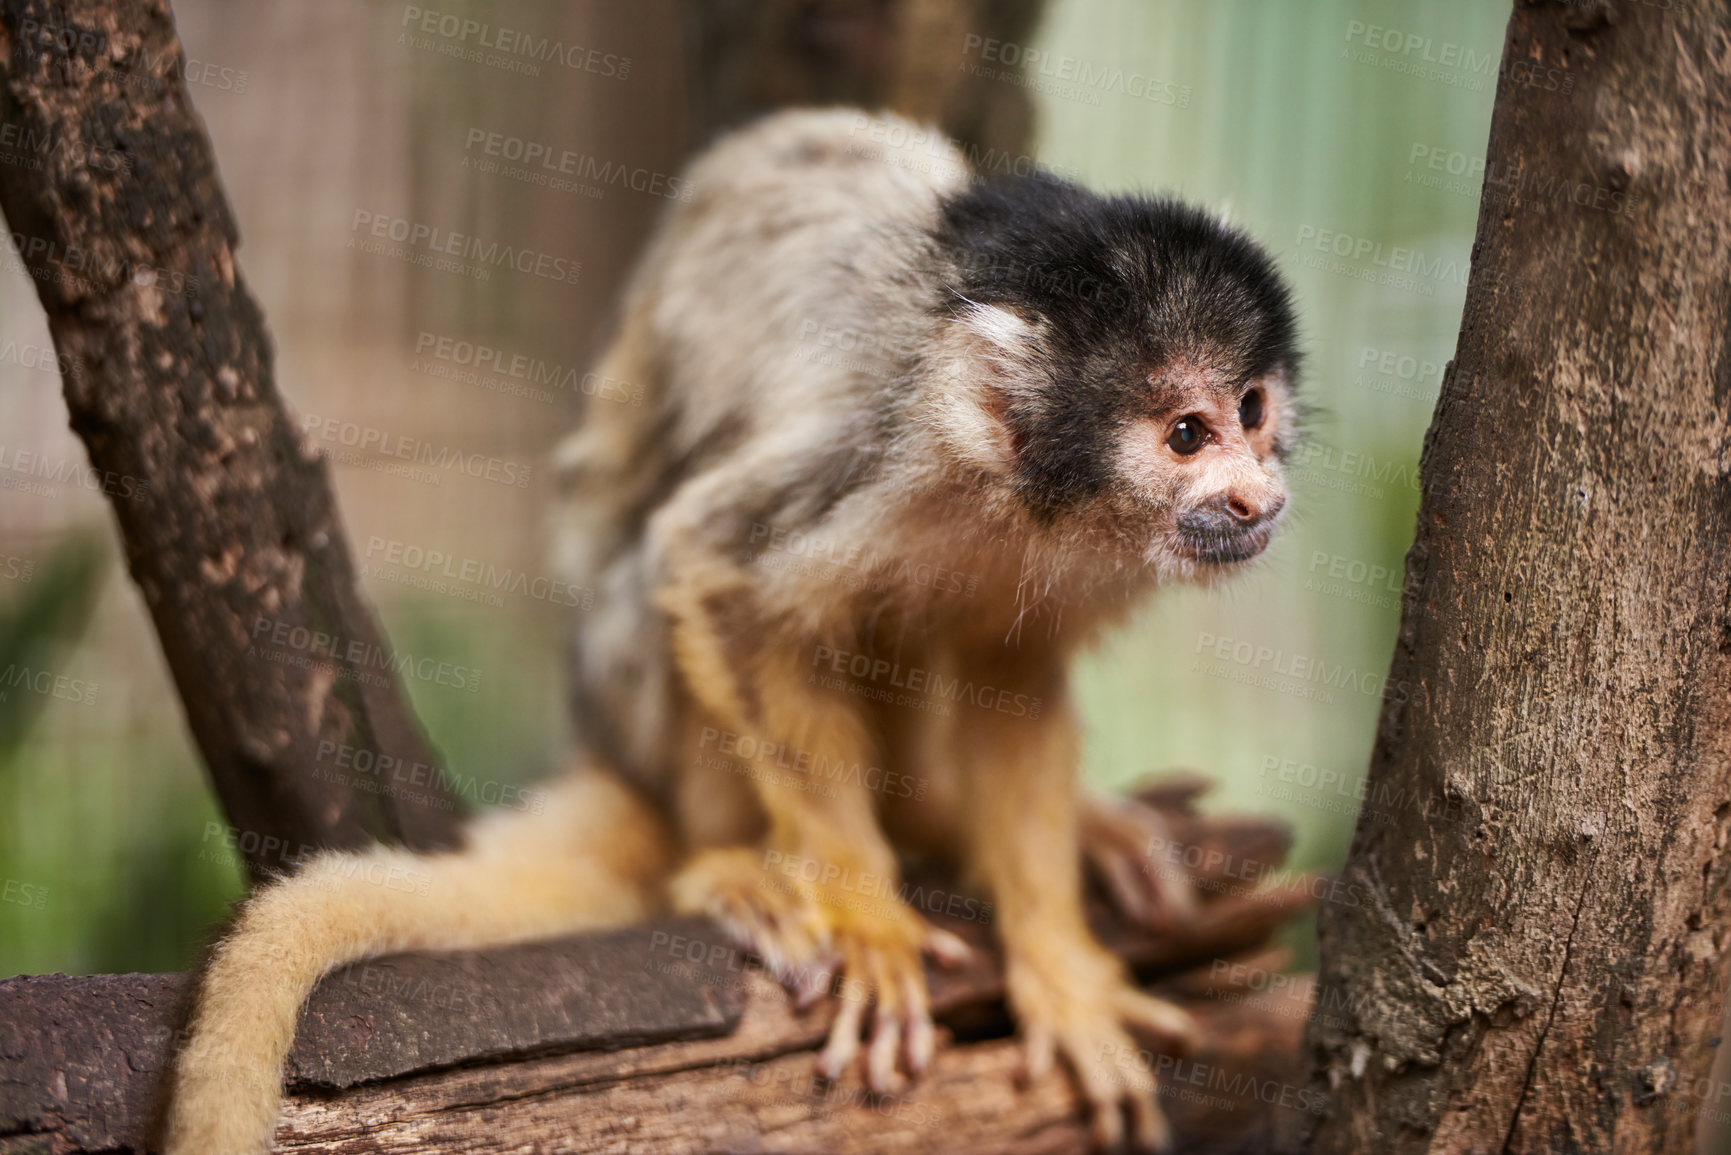 Buy stock photo Full length of one cute little wild monkey sitting alone on a tree outside. Curious primate animal in a wildlife reserve and sanctuary watching attentively. Small adorable living creature in a forest